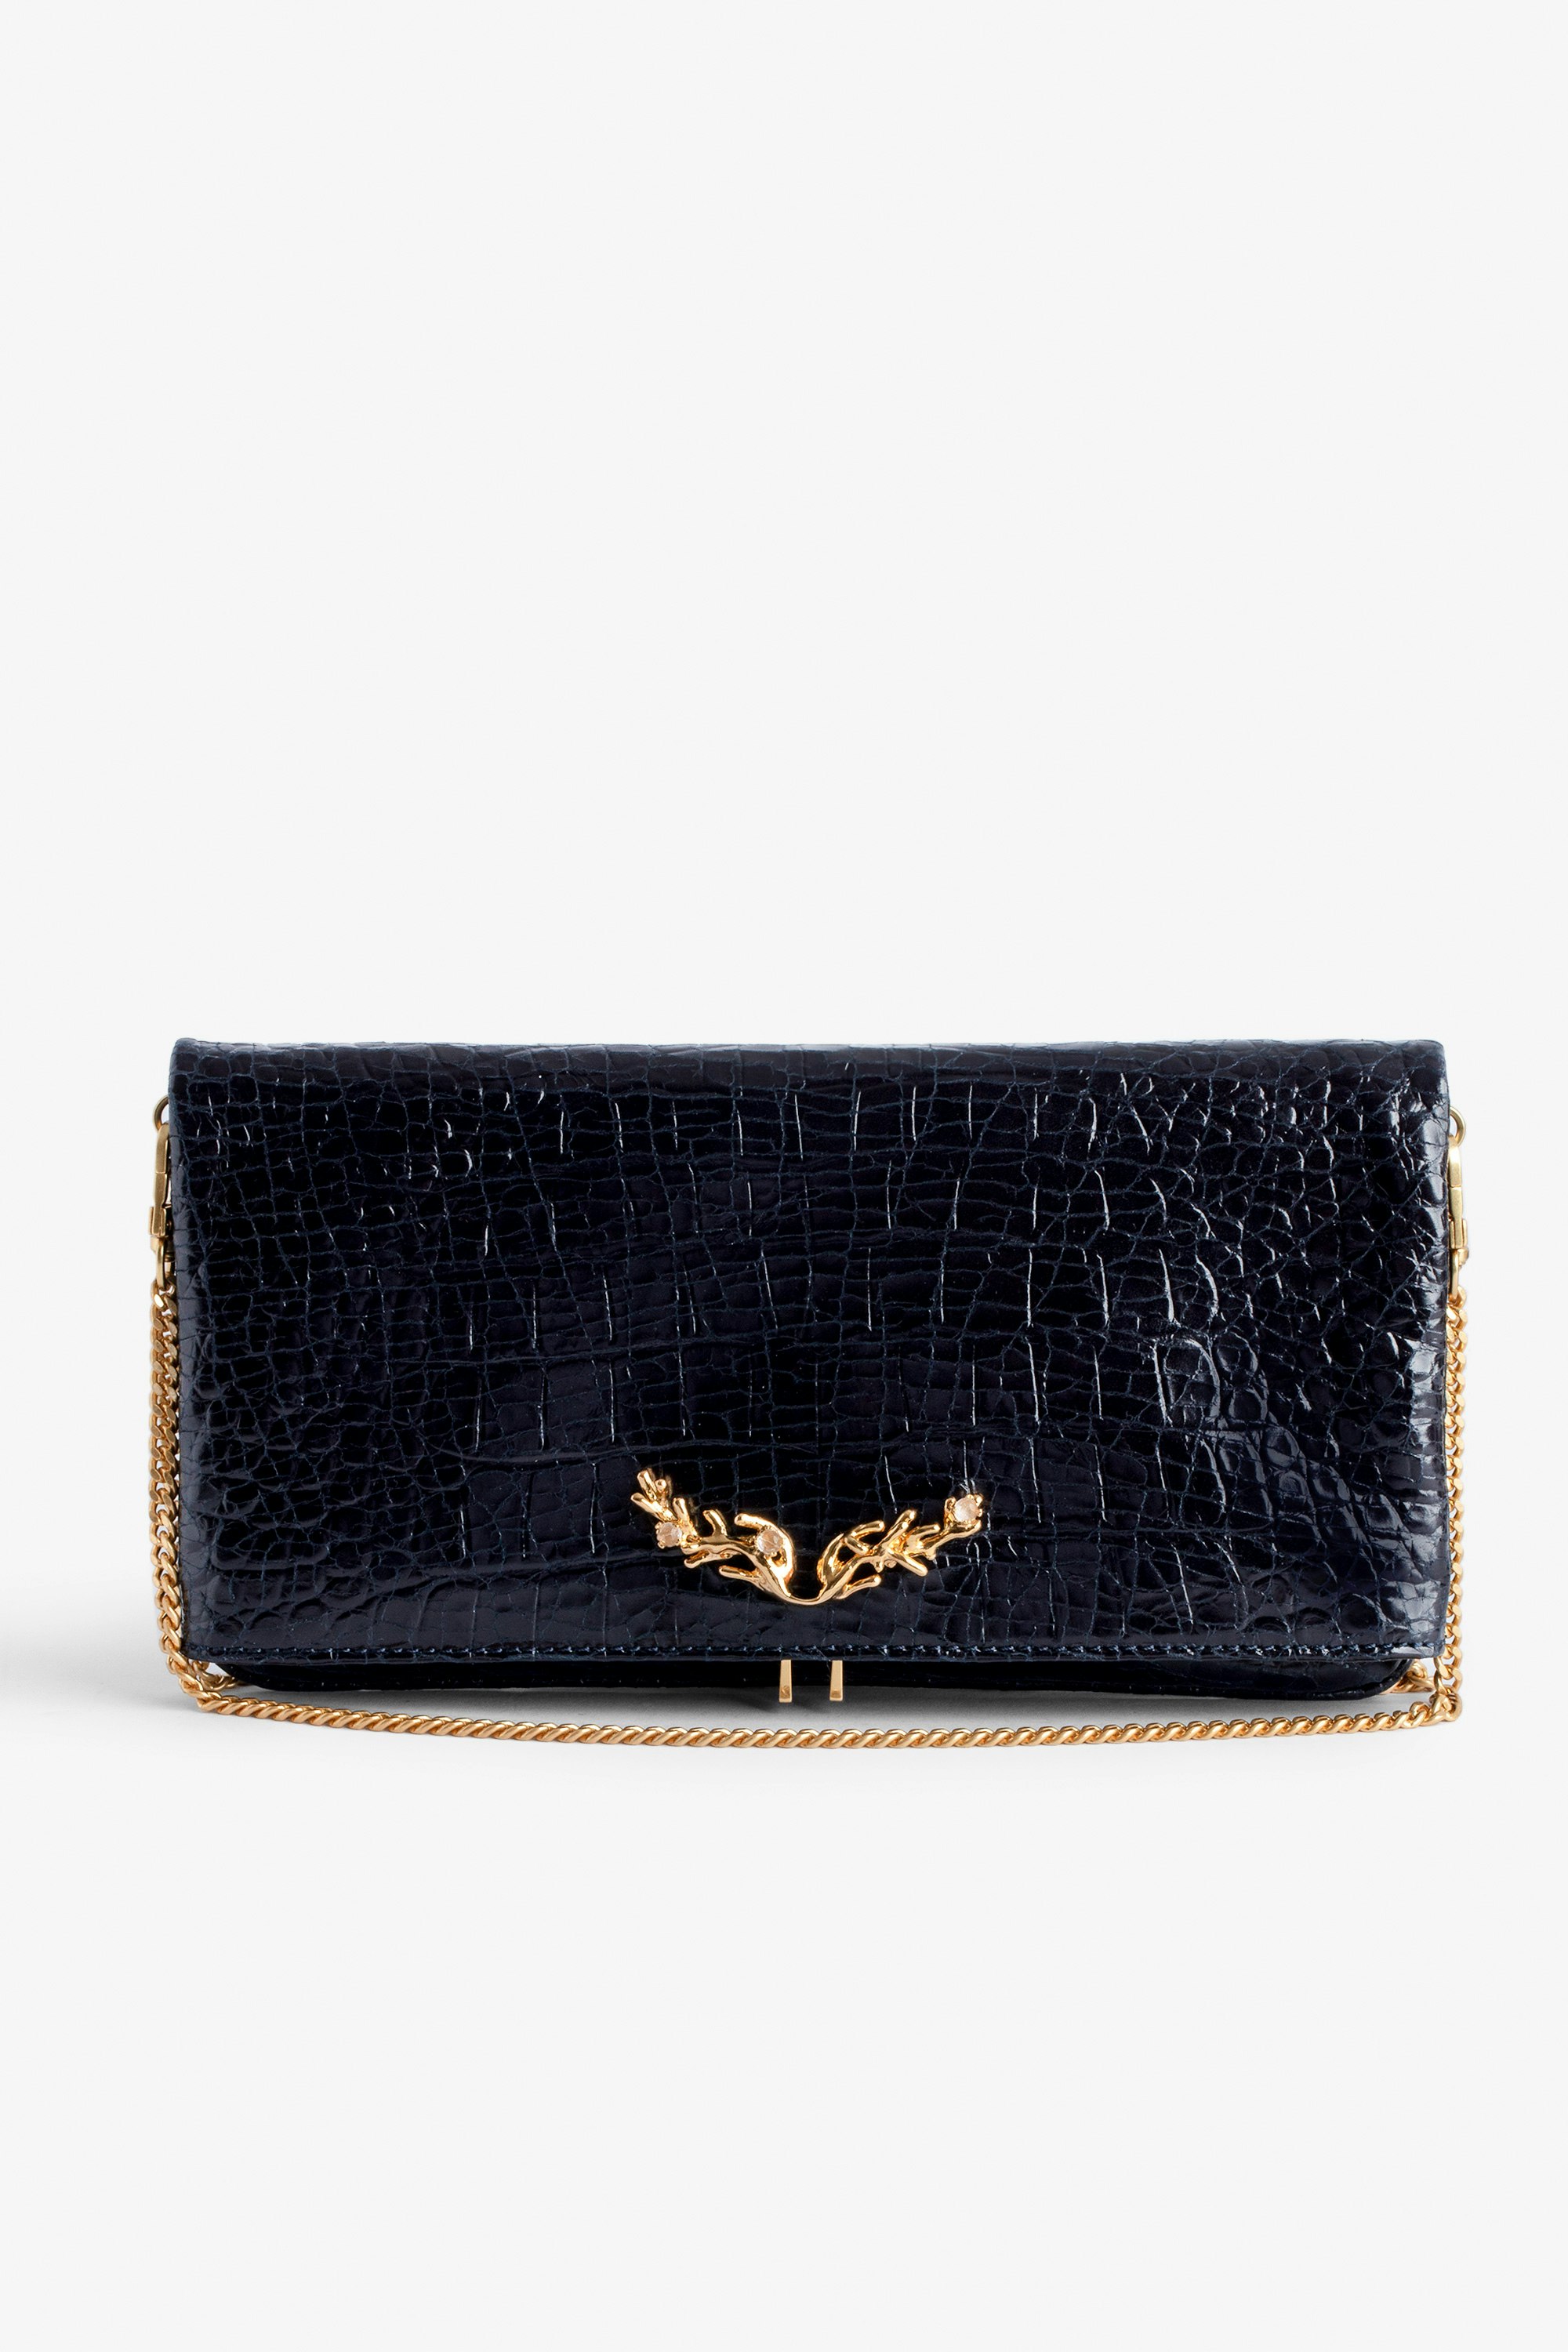 Women's trendy, modern bags and clutches